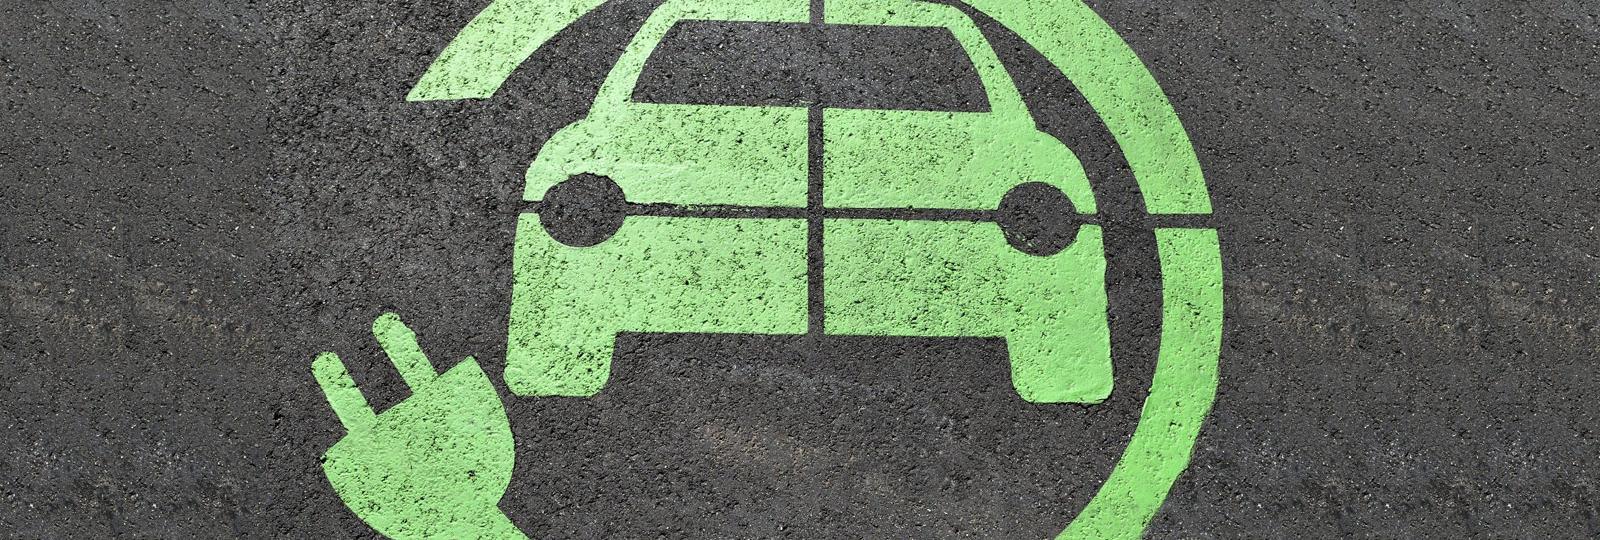 Safe decarbonization of private electric vehicles